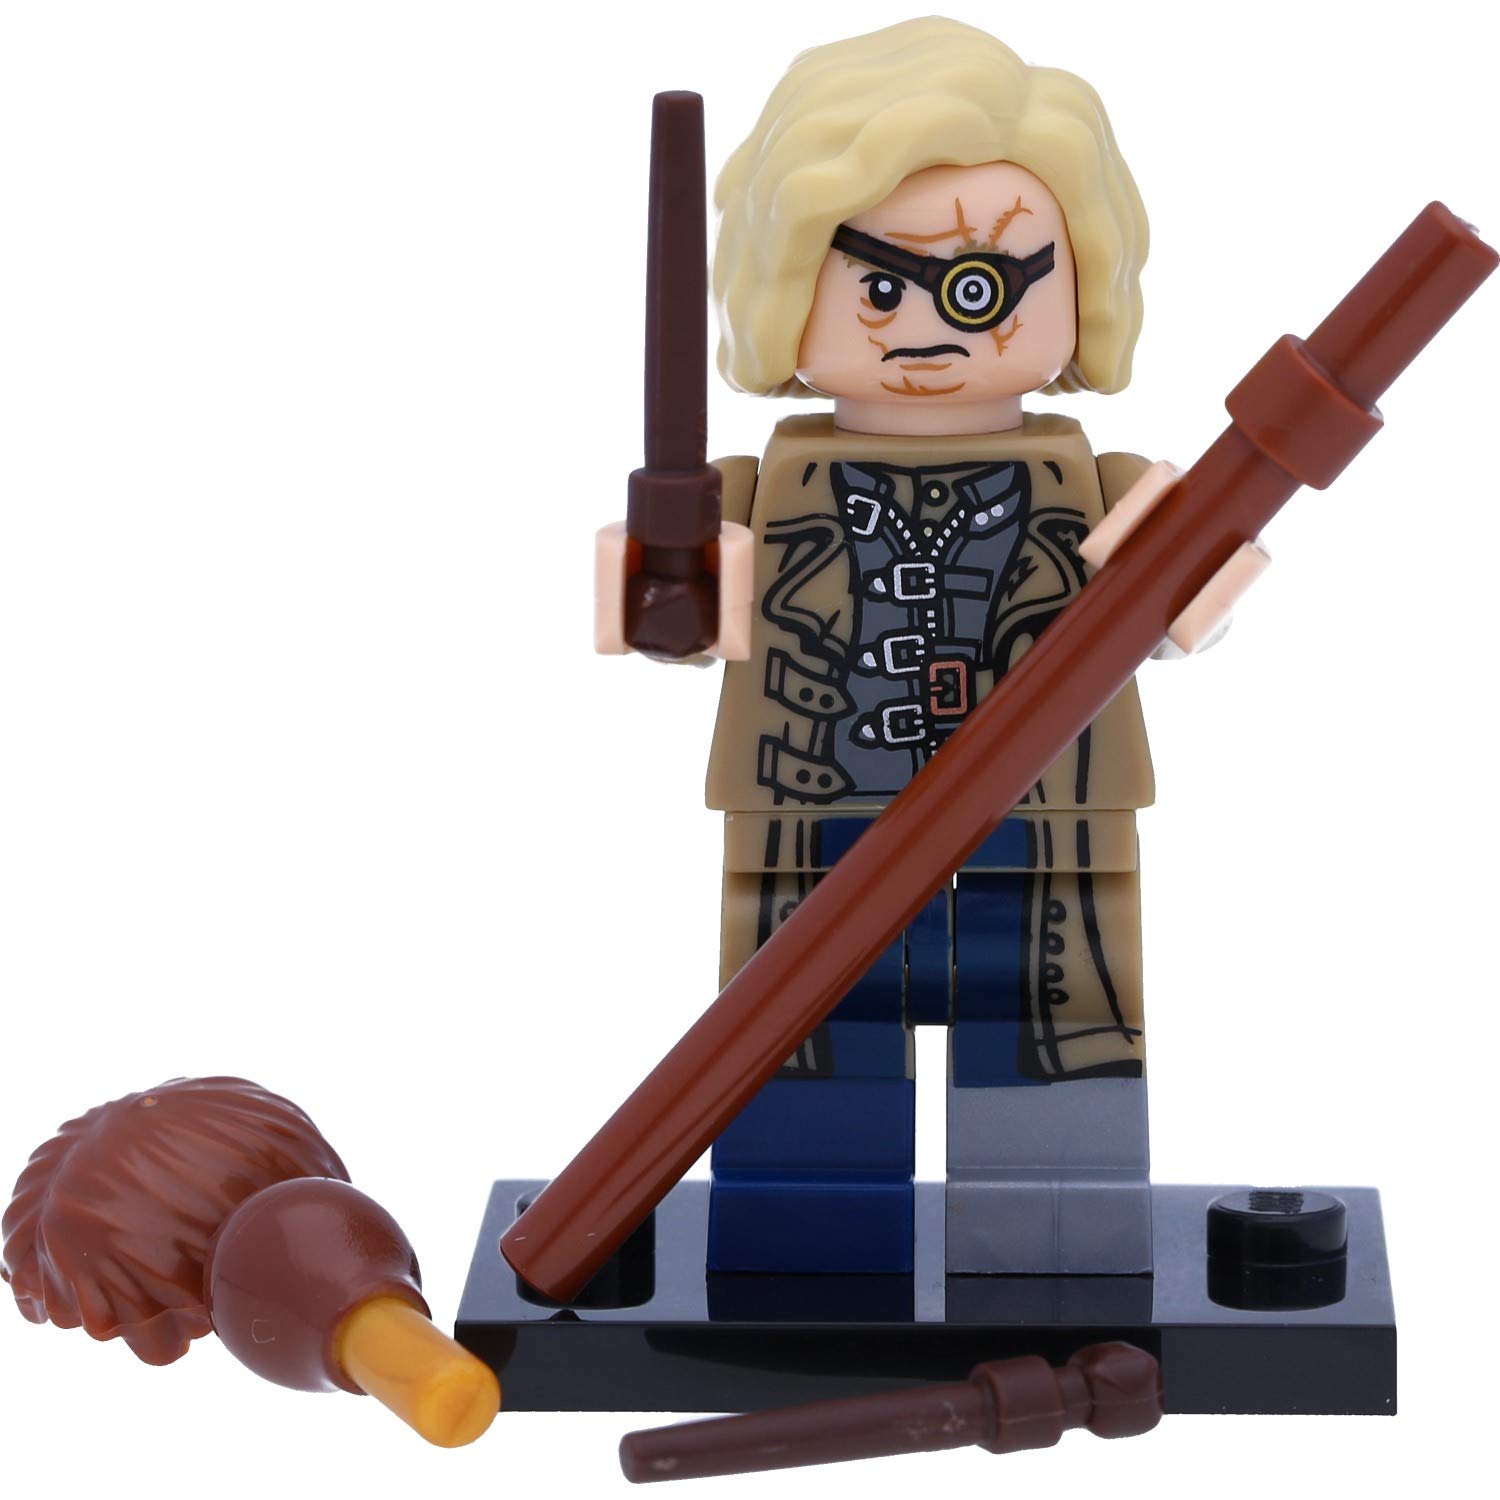 Lego Harry Potter 71022 Collectable Figures